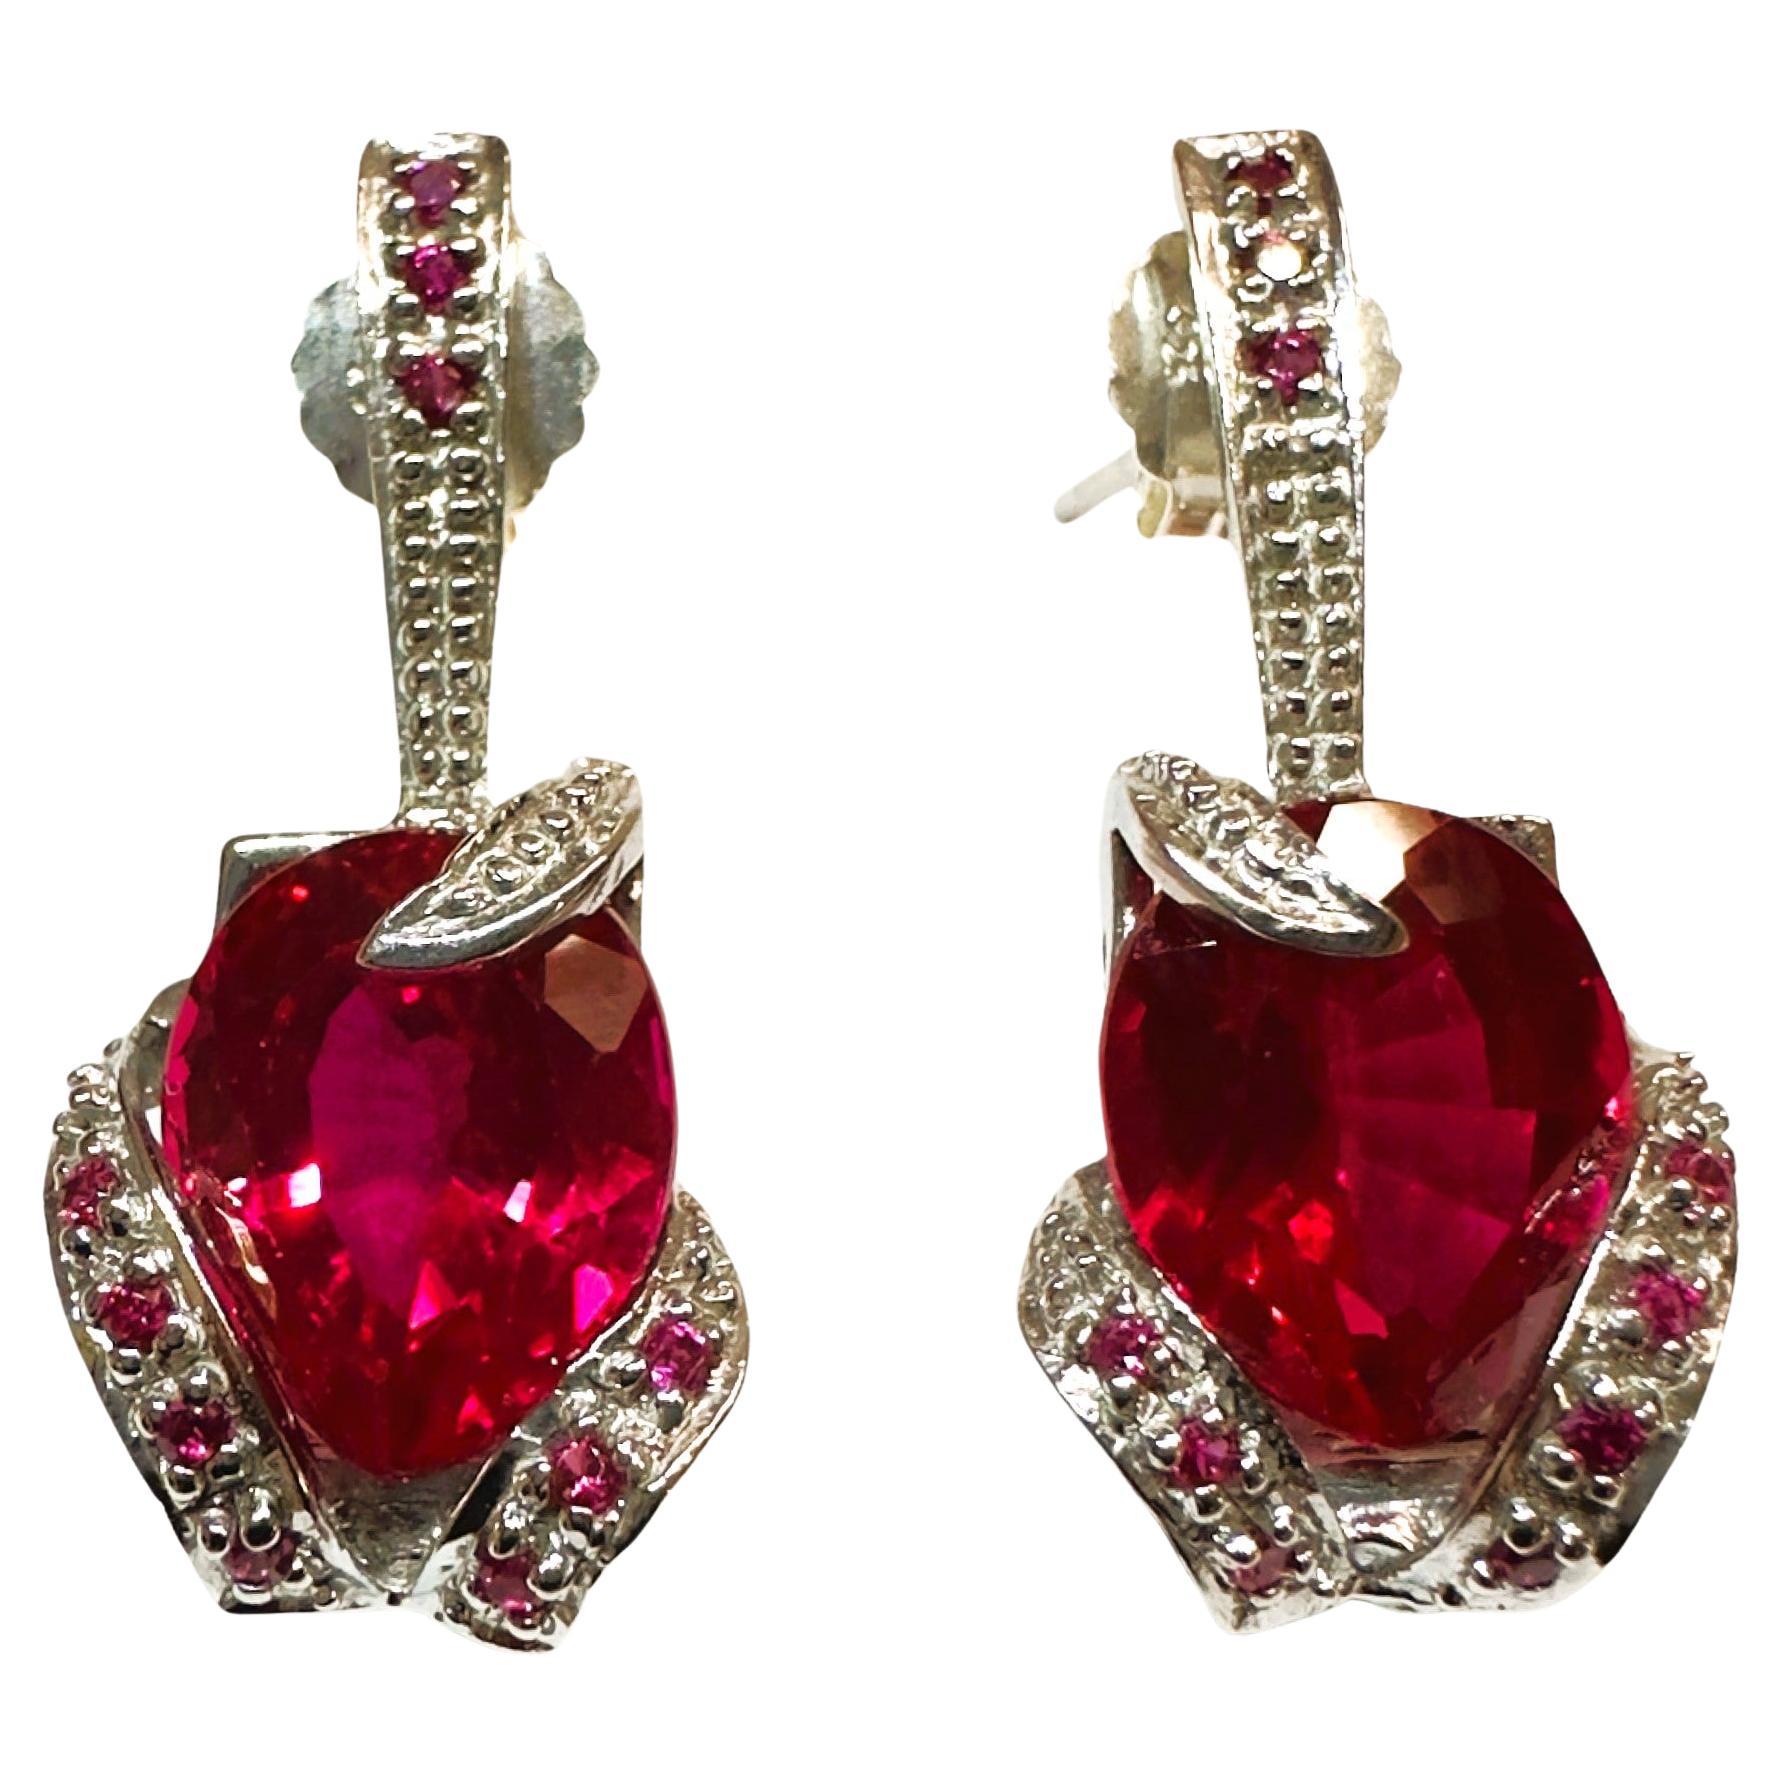 New African 9.70 Ct Pinkish Red Sapphire Sterling Earrings For Sale